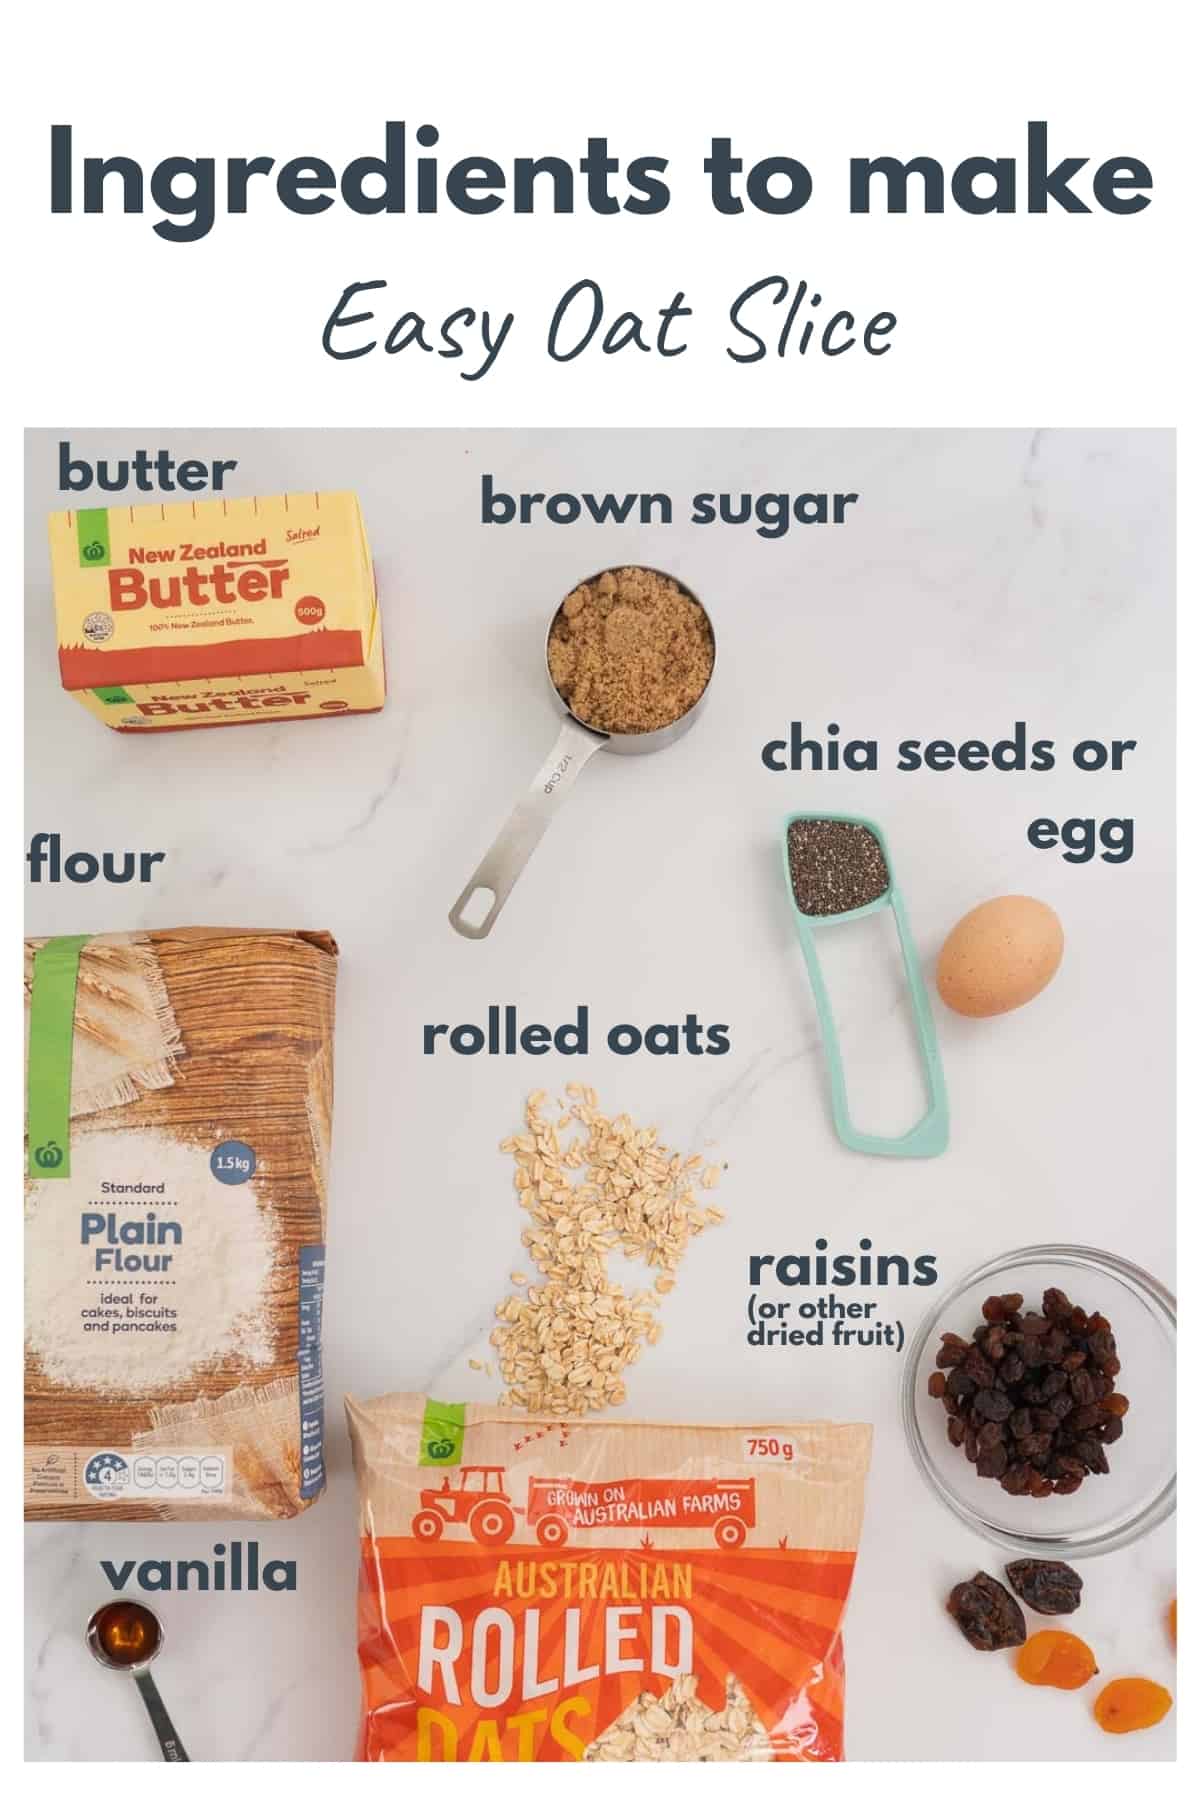 All the ingredients to make easy oat slice